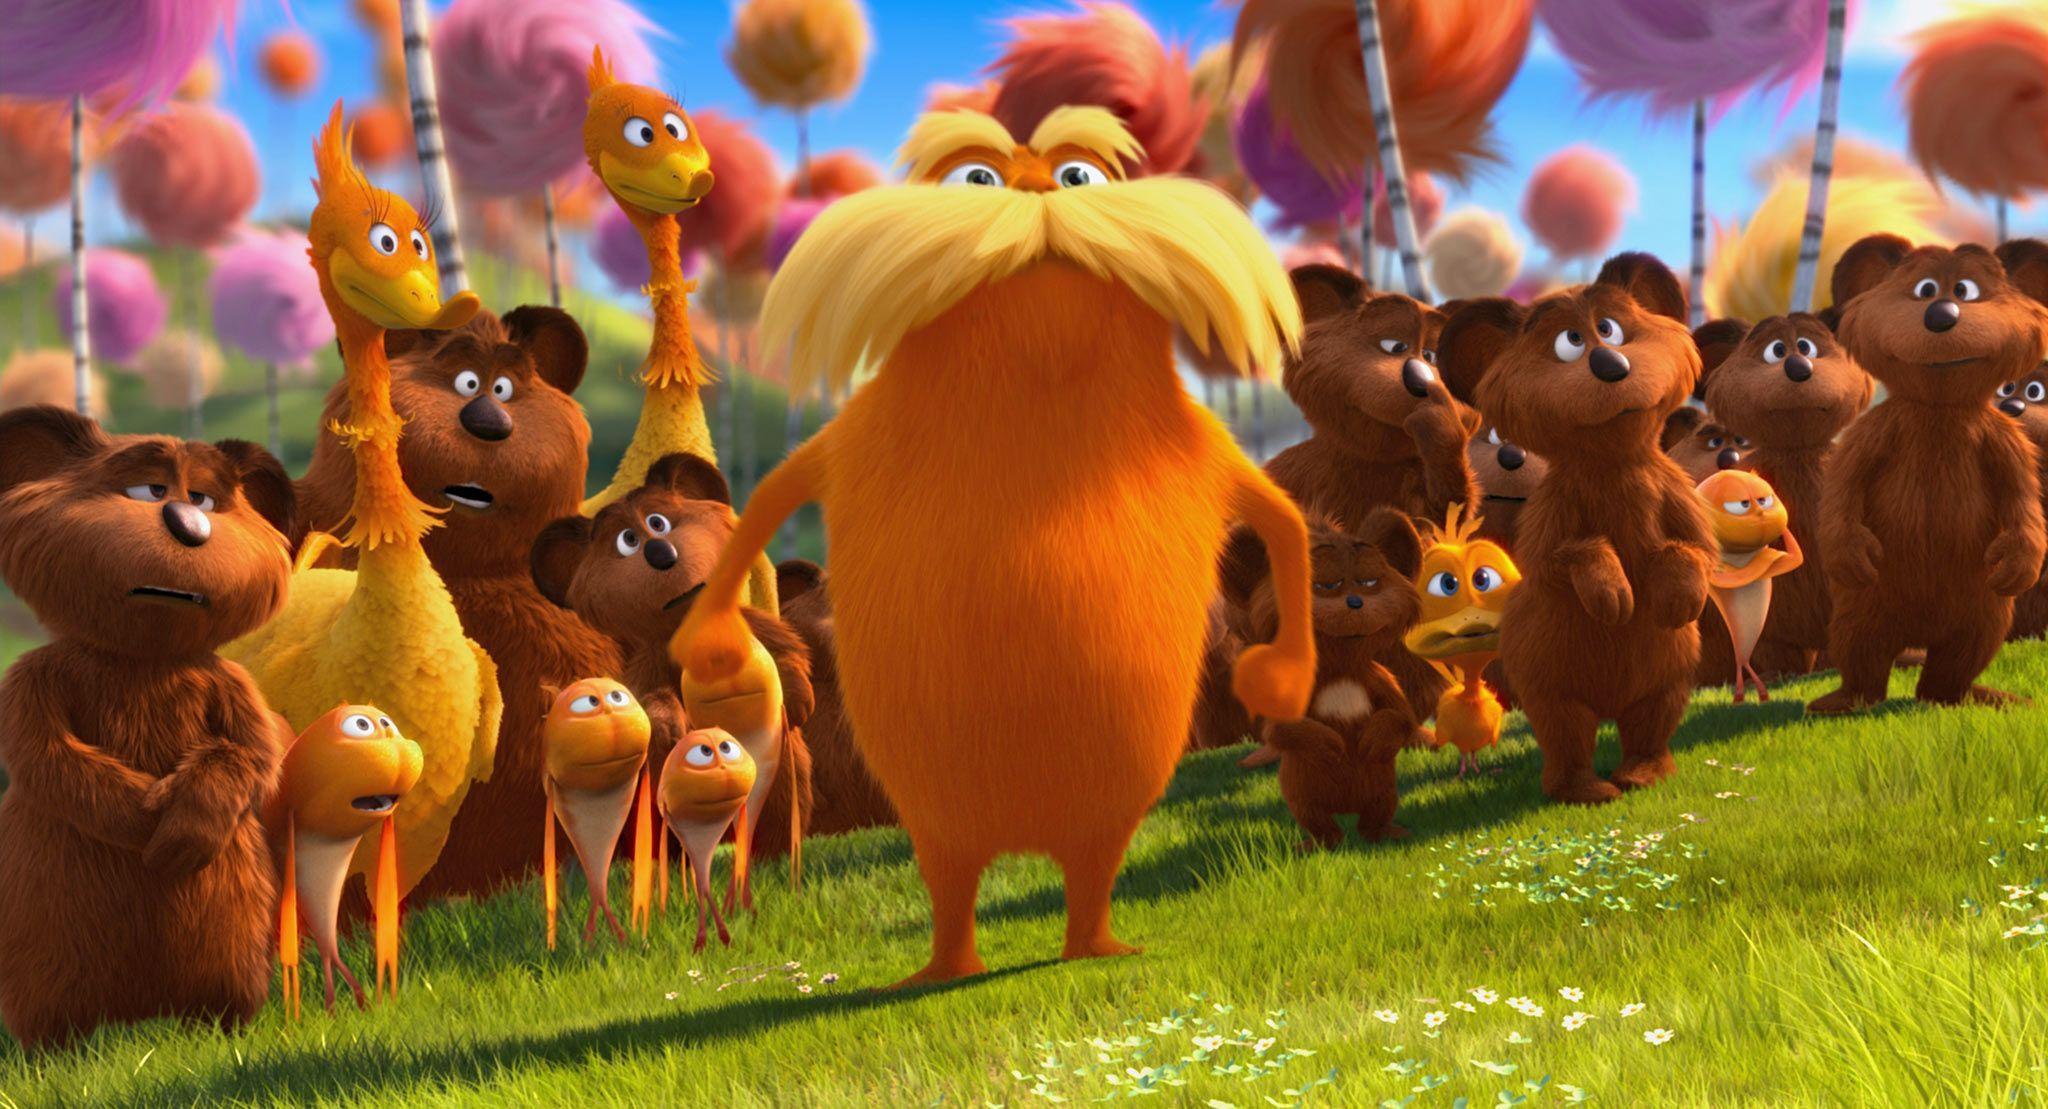 The Lorax Takes a Stand in Dr. Seuss' Movie Desktop Wallpaper